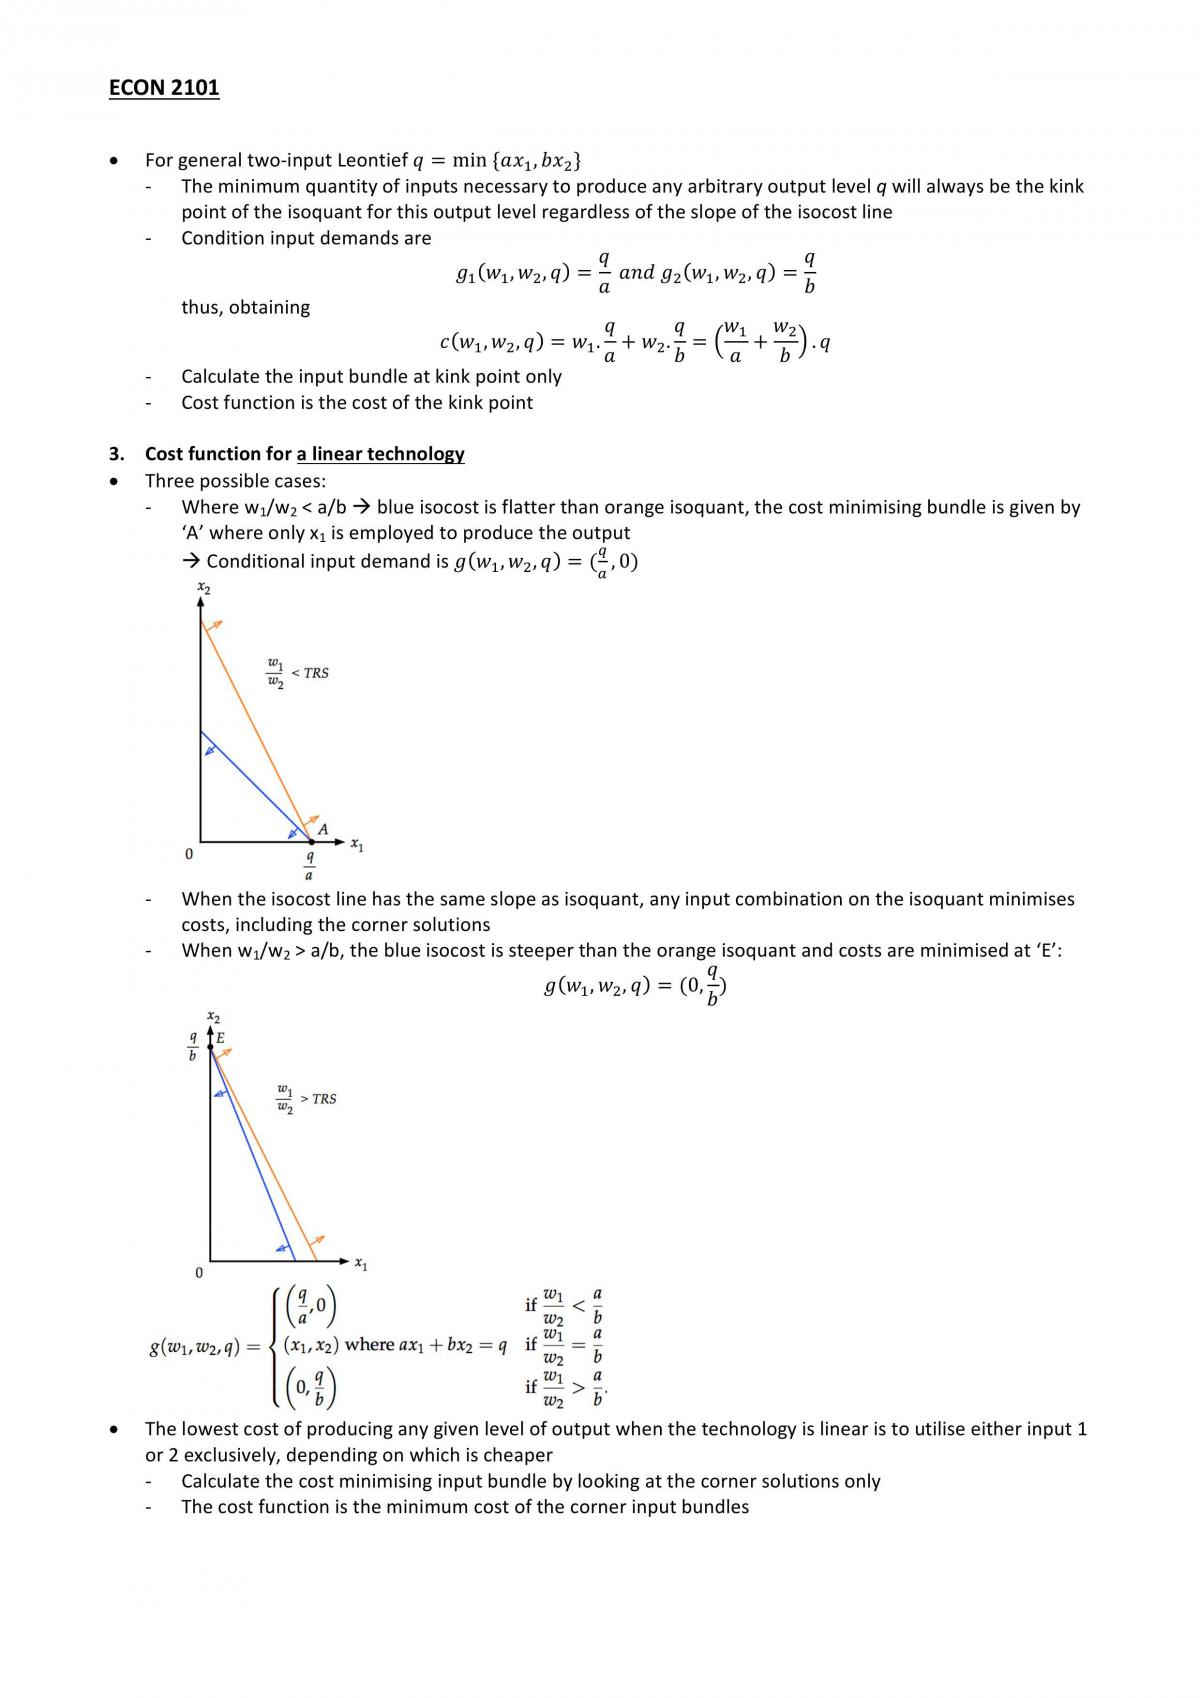 ECON2101 Notes - Page 12